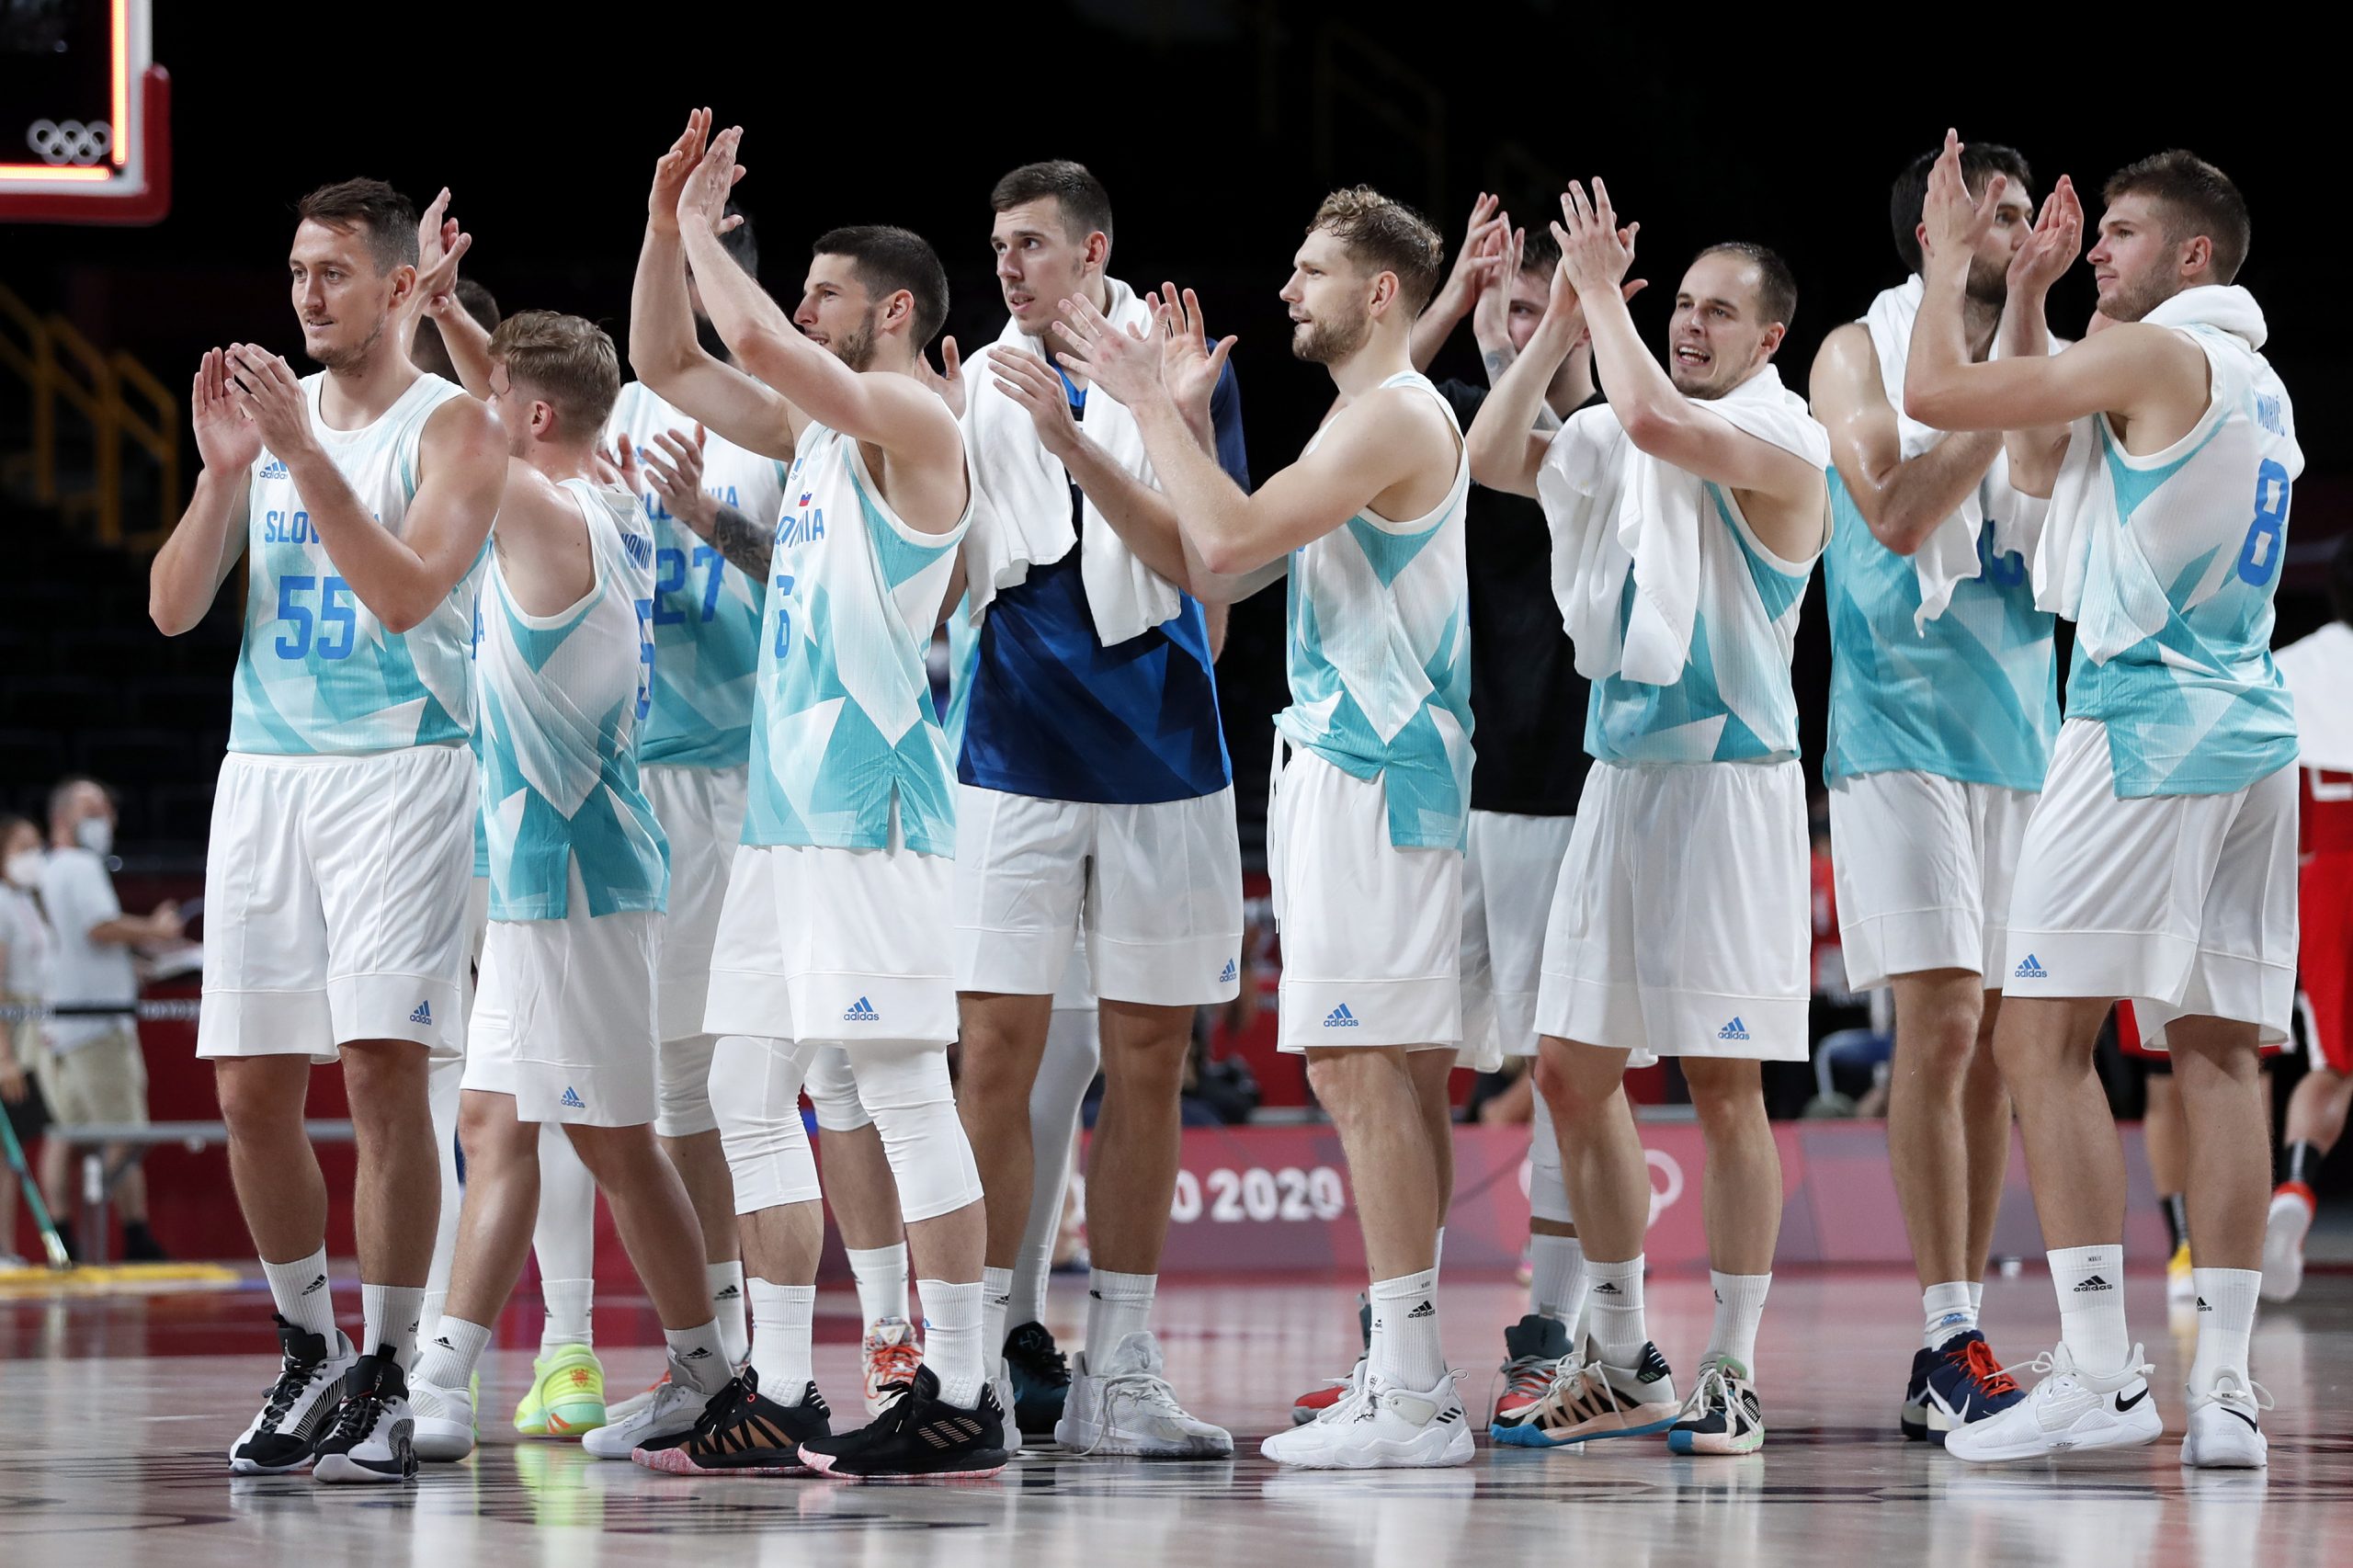 epa09375903 Players of Slovenia celebrate after the men's preliminary round Group C match against Japan during the Basketball events of the Tokyo 2020 Olympic Games at the Saitama Super Arena in Saitama, Japan, 29 July 2021.  EPA/KIYOSHI OTA